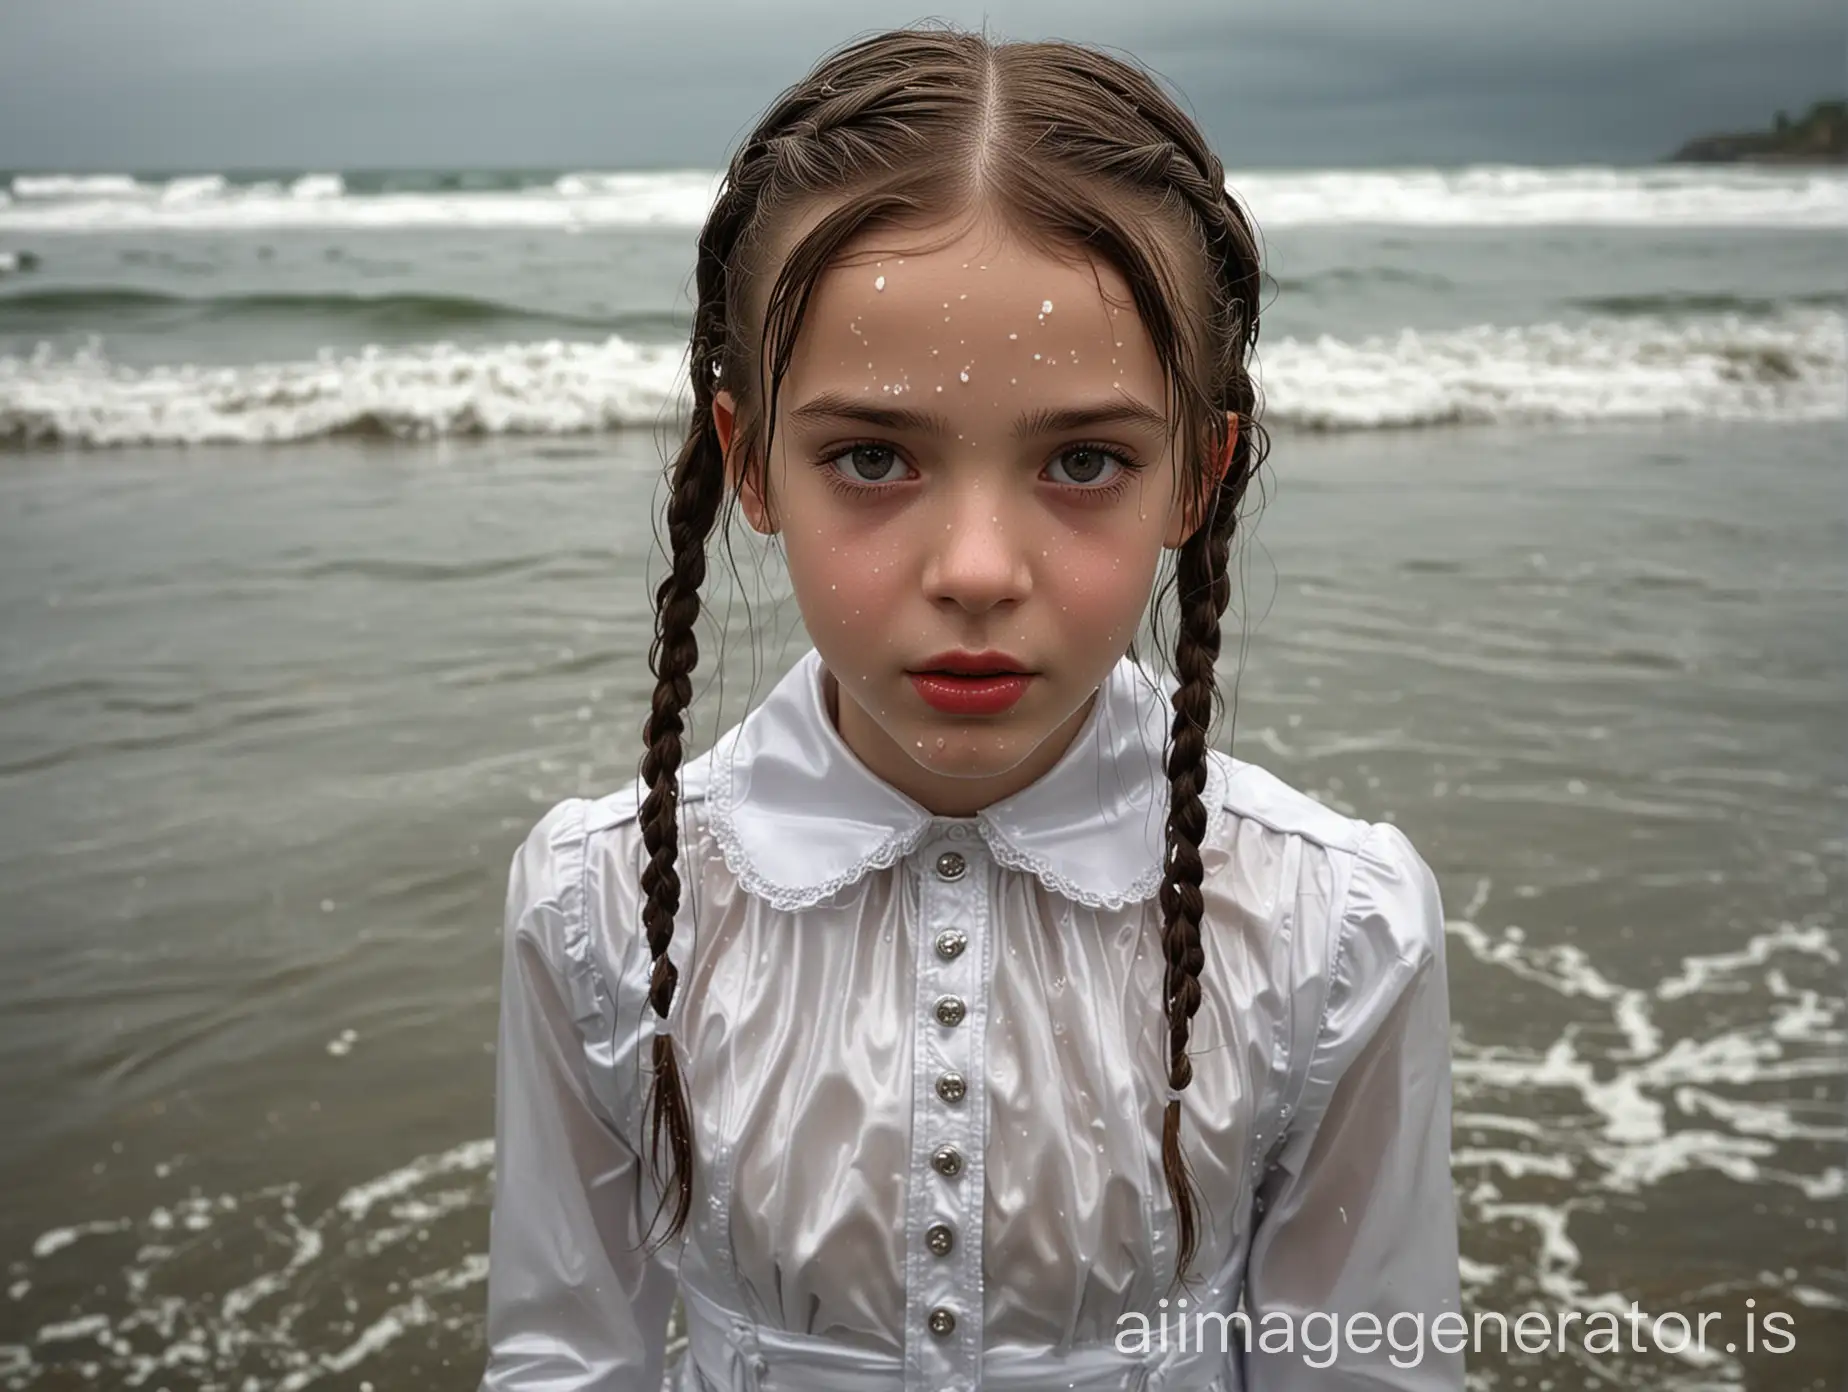 Young-French-Girl-in-Shiny-First-Communion-Outfit-Emerges-from-Rainy-Sea